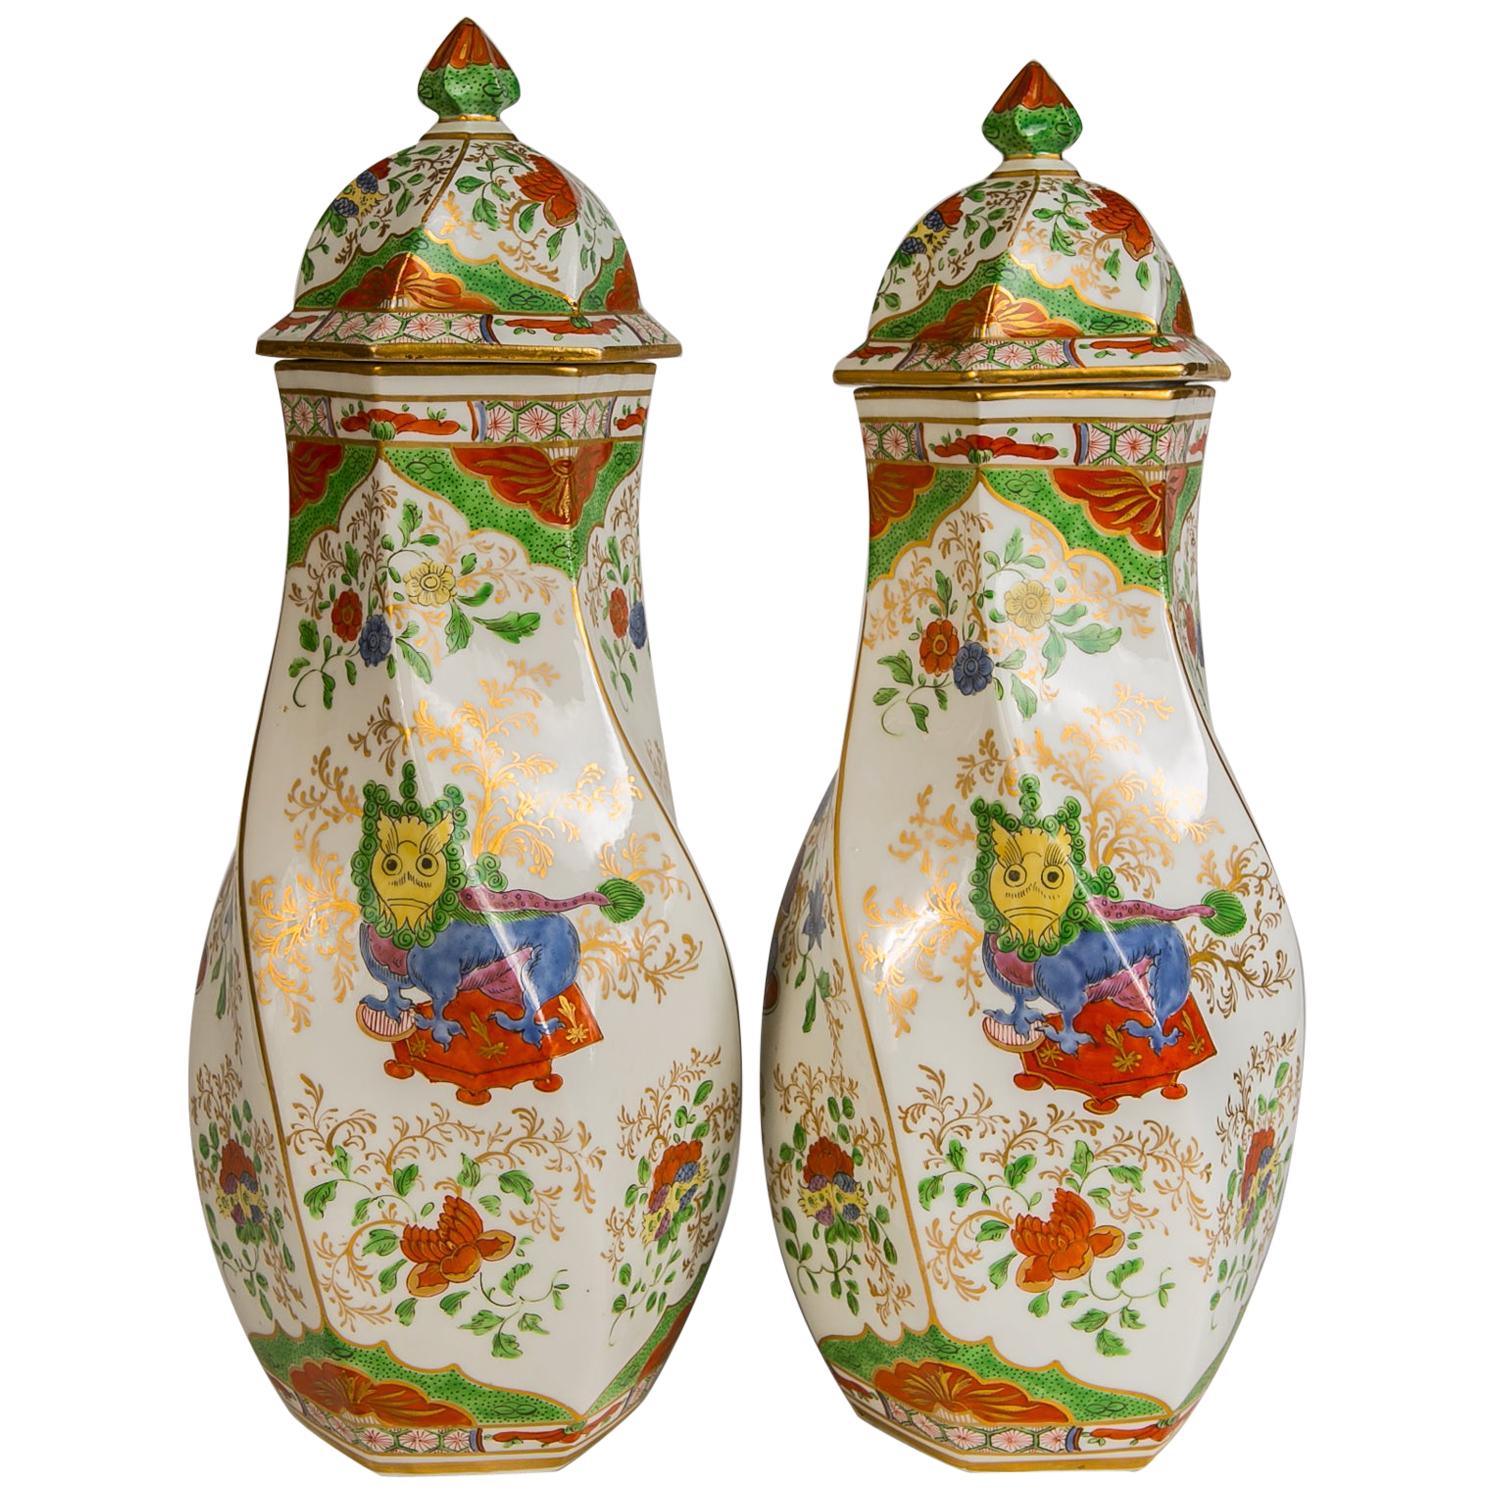 Pair of Vases in Dragon in Compartments Pattern